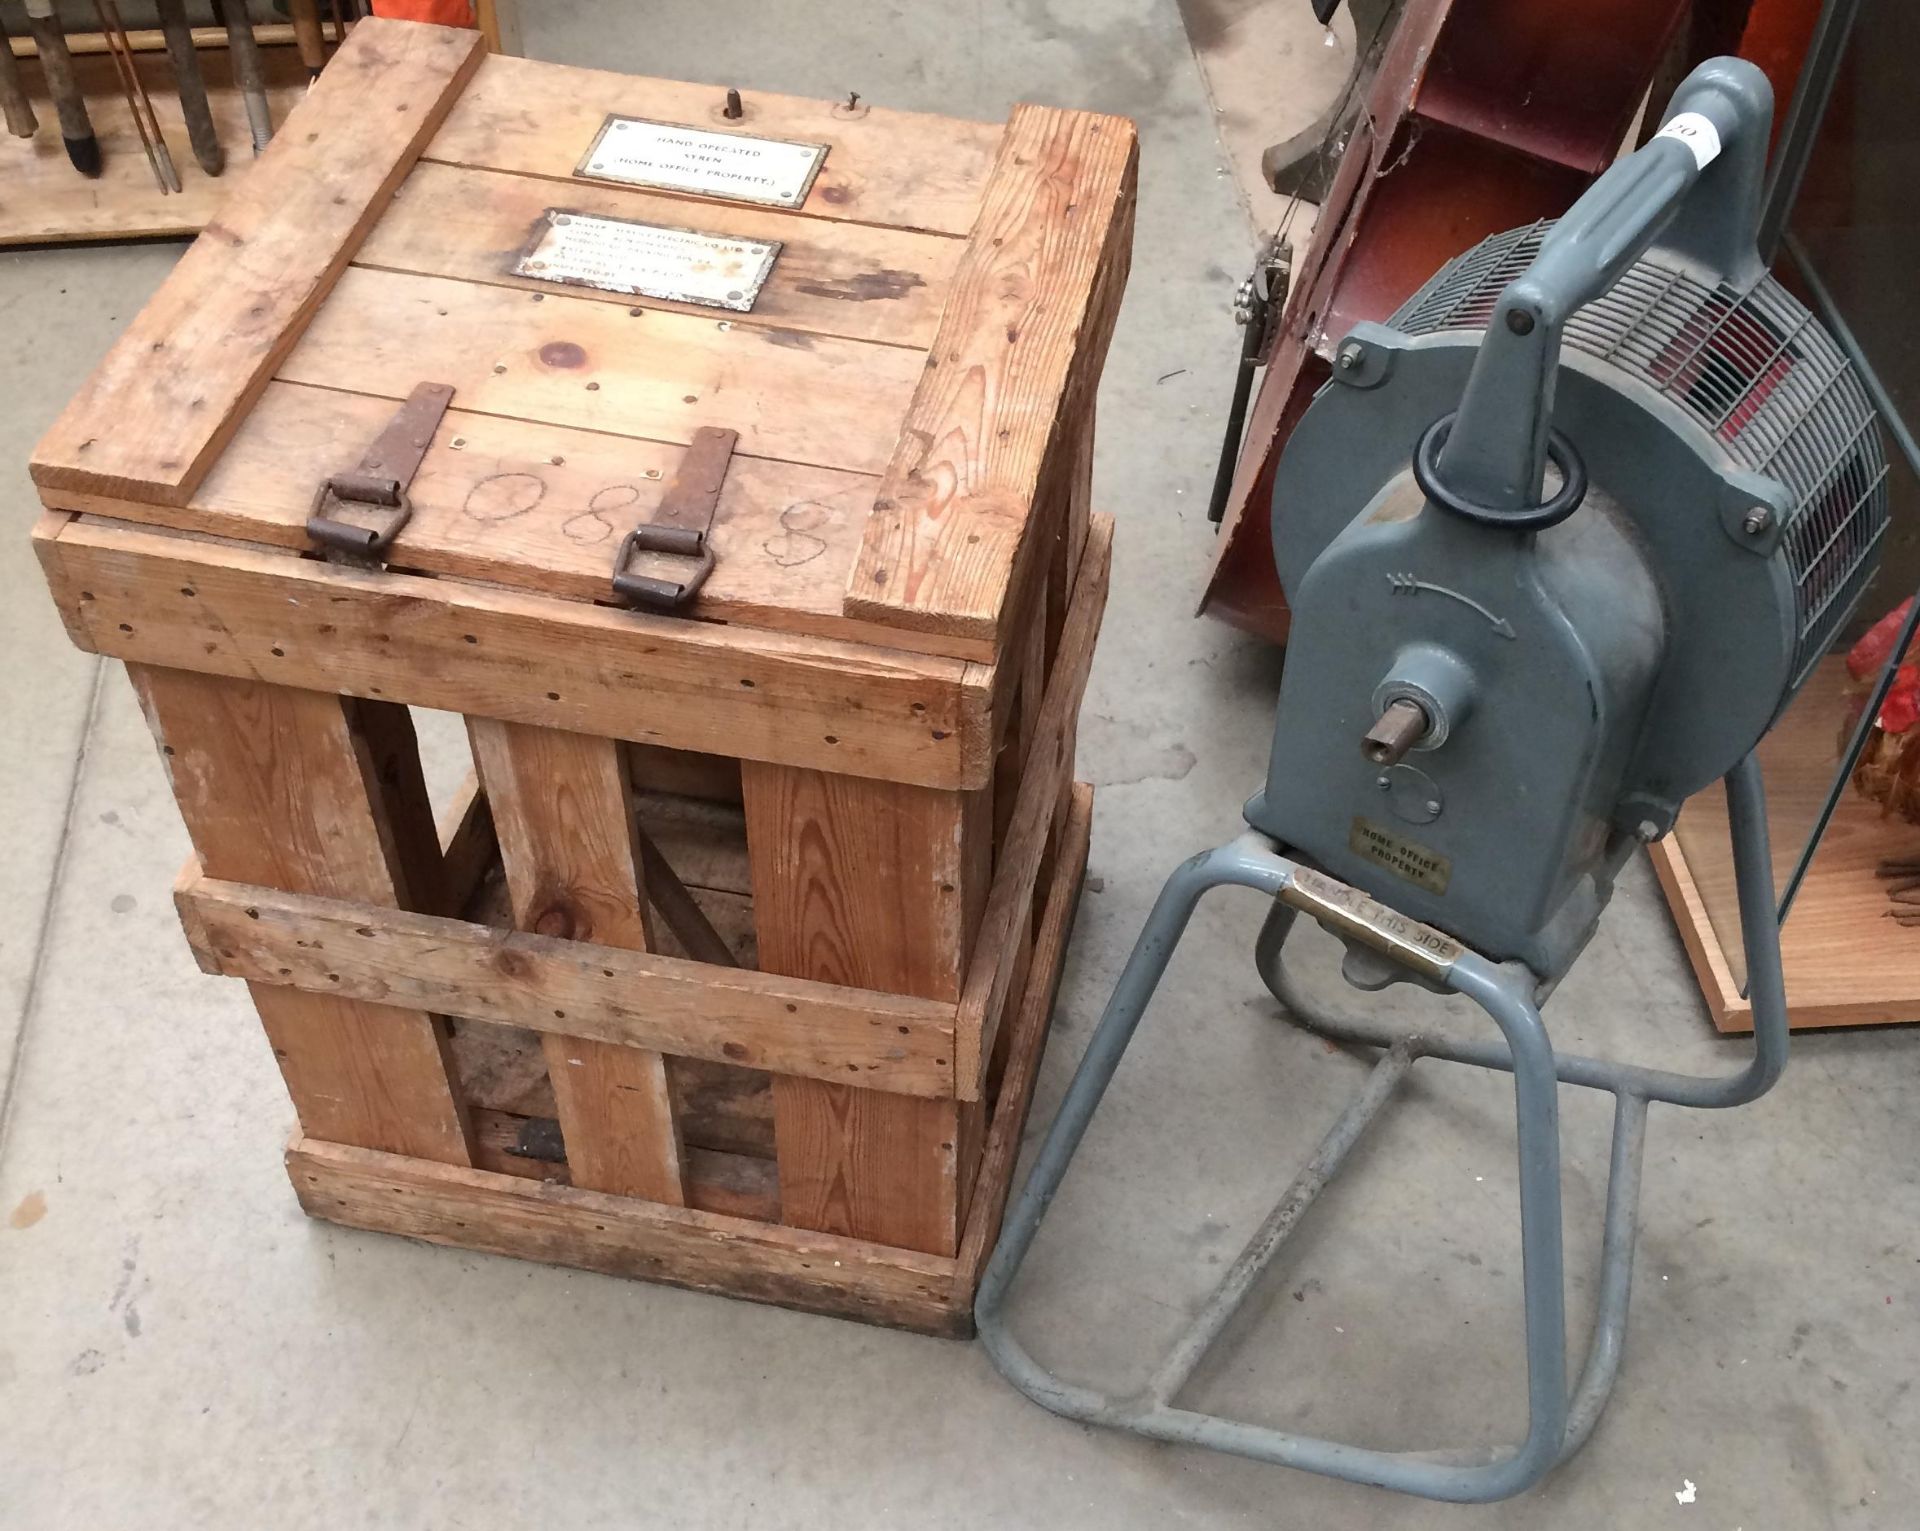 A Secomak 447 hand operated air raid siren together with a wooden travel crate (please note - no